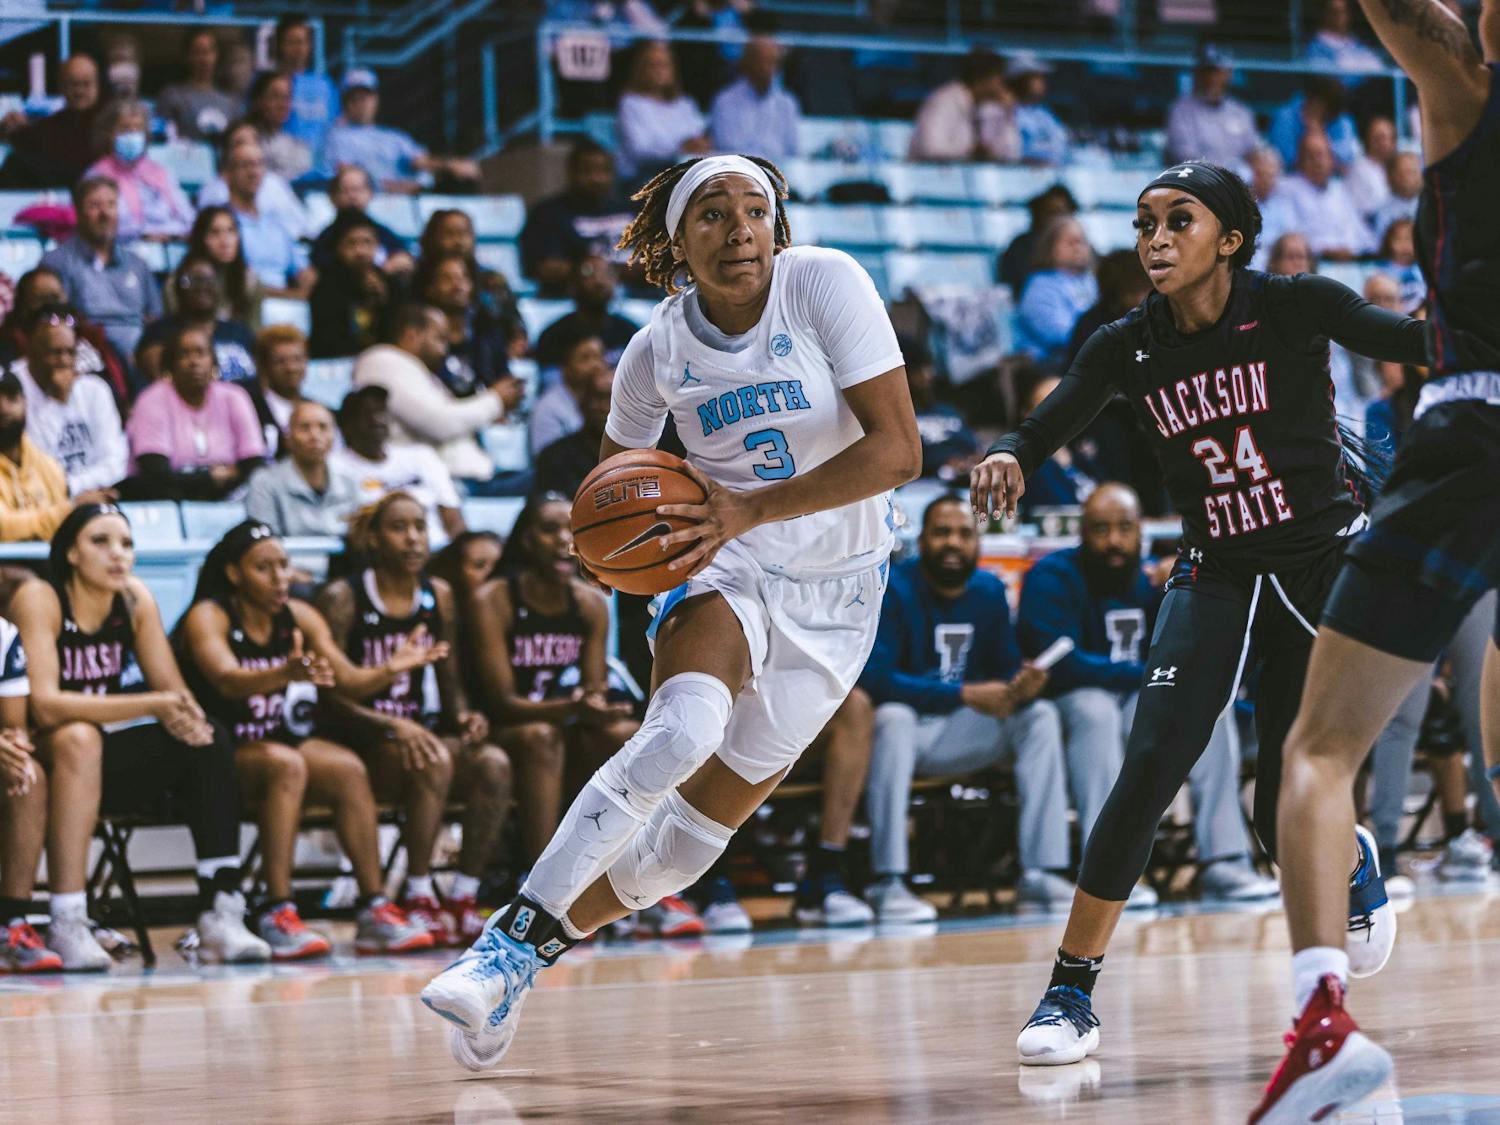 UNC junior guard Kennedy Todd-Williams (3) drives in near the end of the second quarter of the women's basketball game against Jackson State in Carmichael Arena on Wednesday, Nov. 9, 2022. UNC beat Jackson State 91-51.